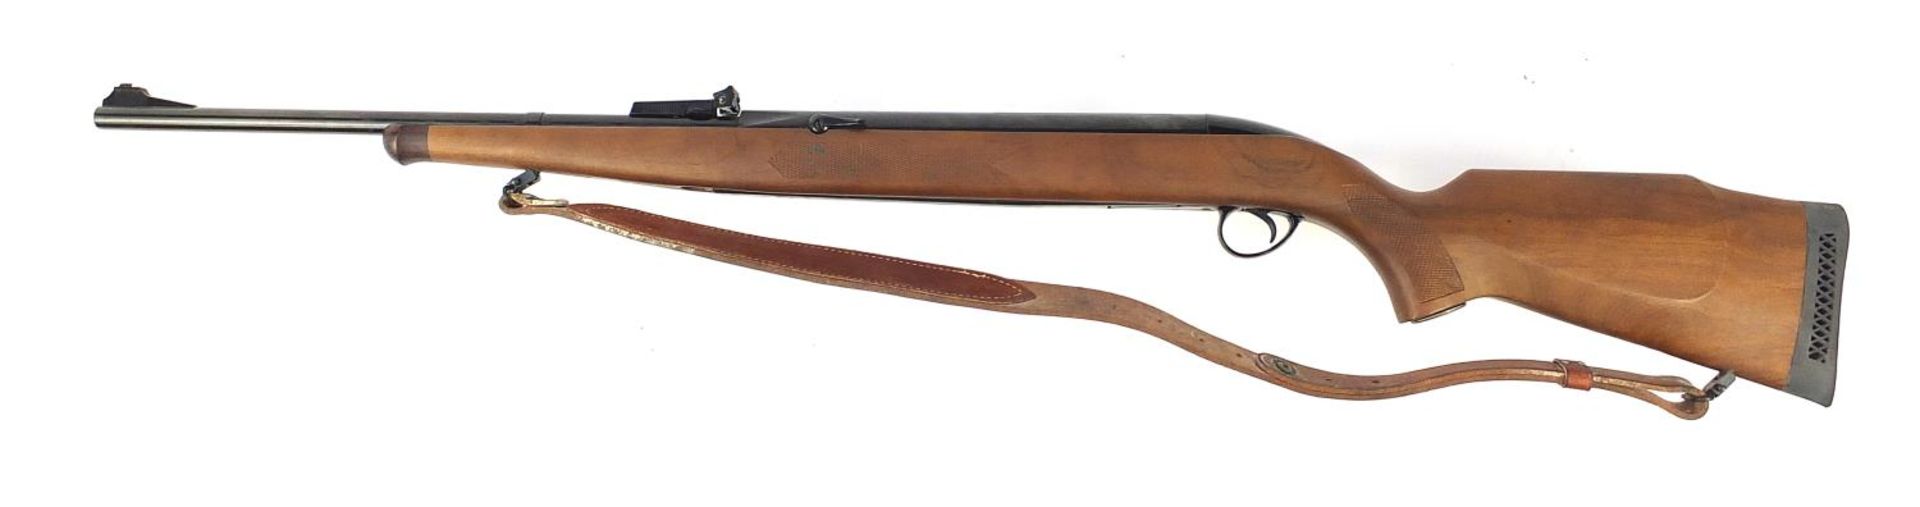 BSA 1982 Piled Arms Centenary .177 cal under lever air rifle with case, one of one thousand, - Image 2 of 12